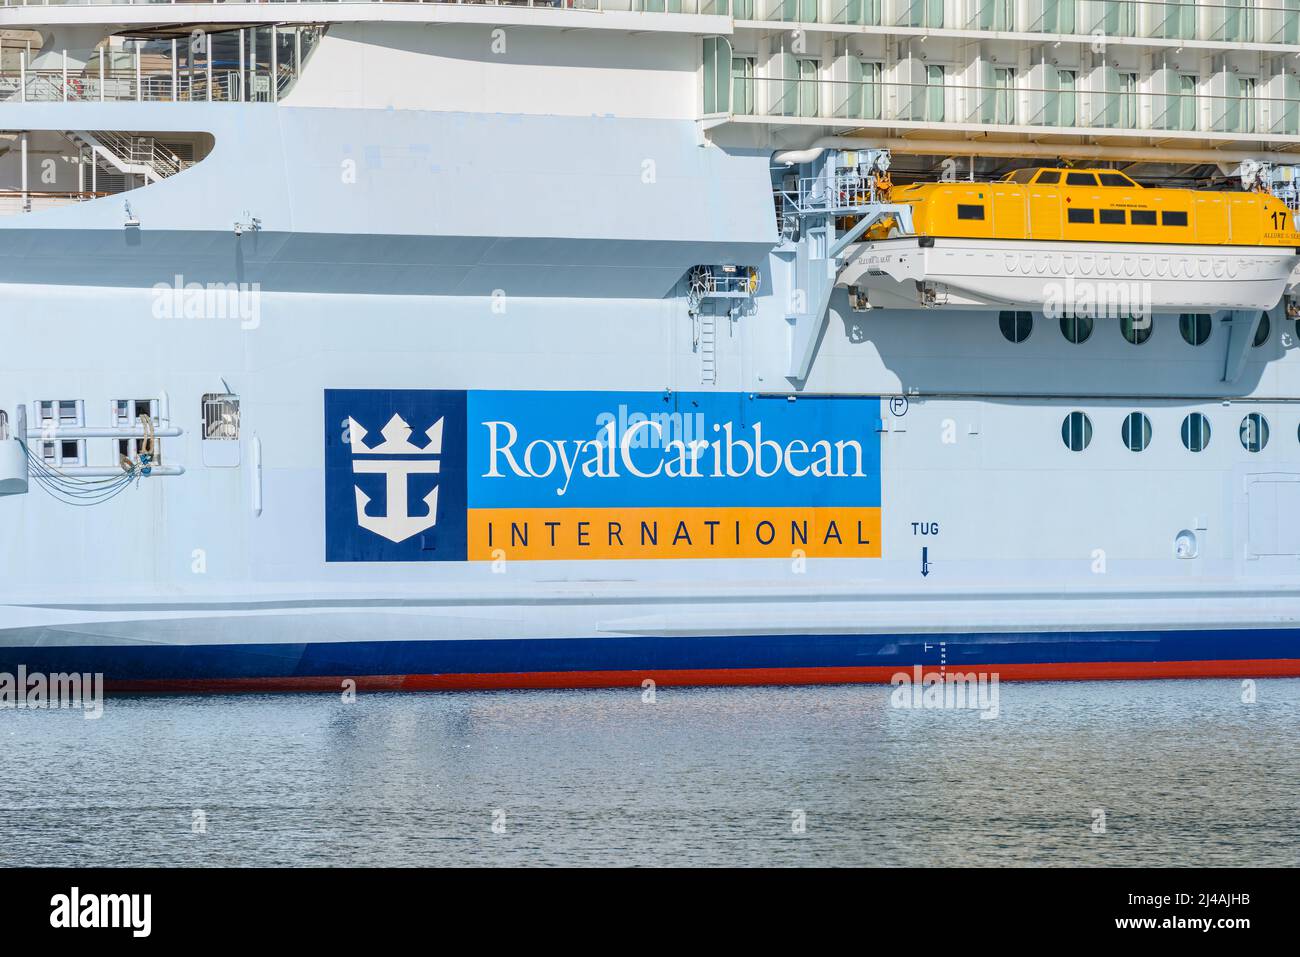 View of the Royal Caribbean International brand logo on the side of RCI's' ship Allure of the Seas - July 2020. Stock Photo